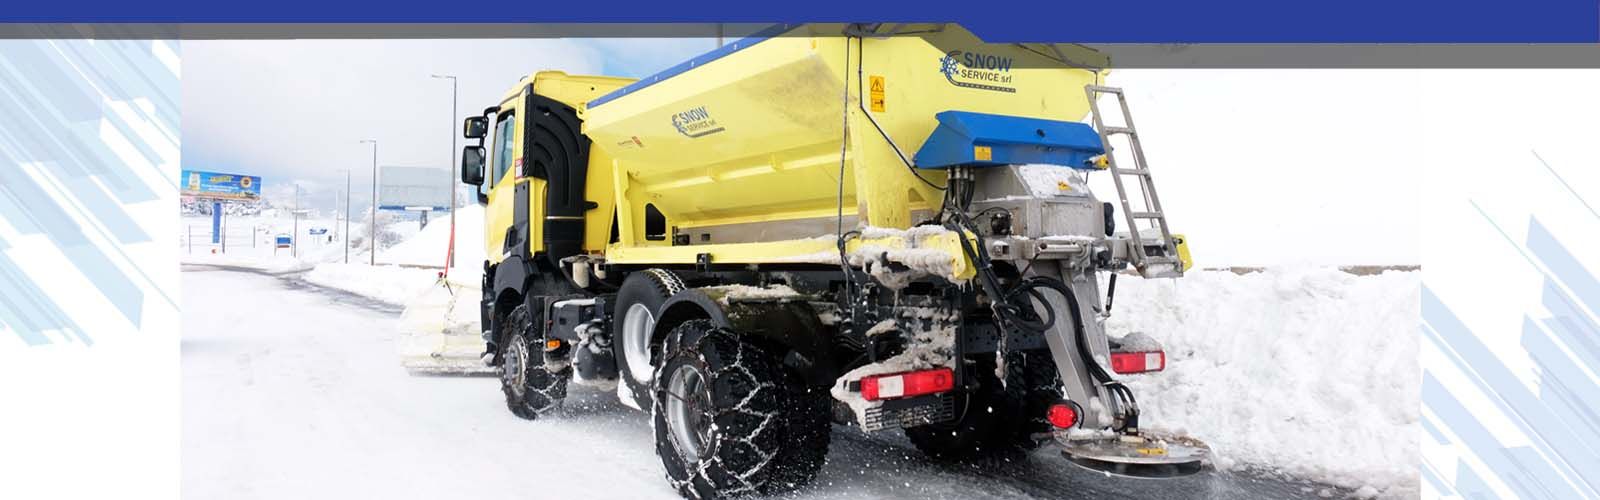 Snow service machines for winter roads and salt spreaders 04